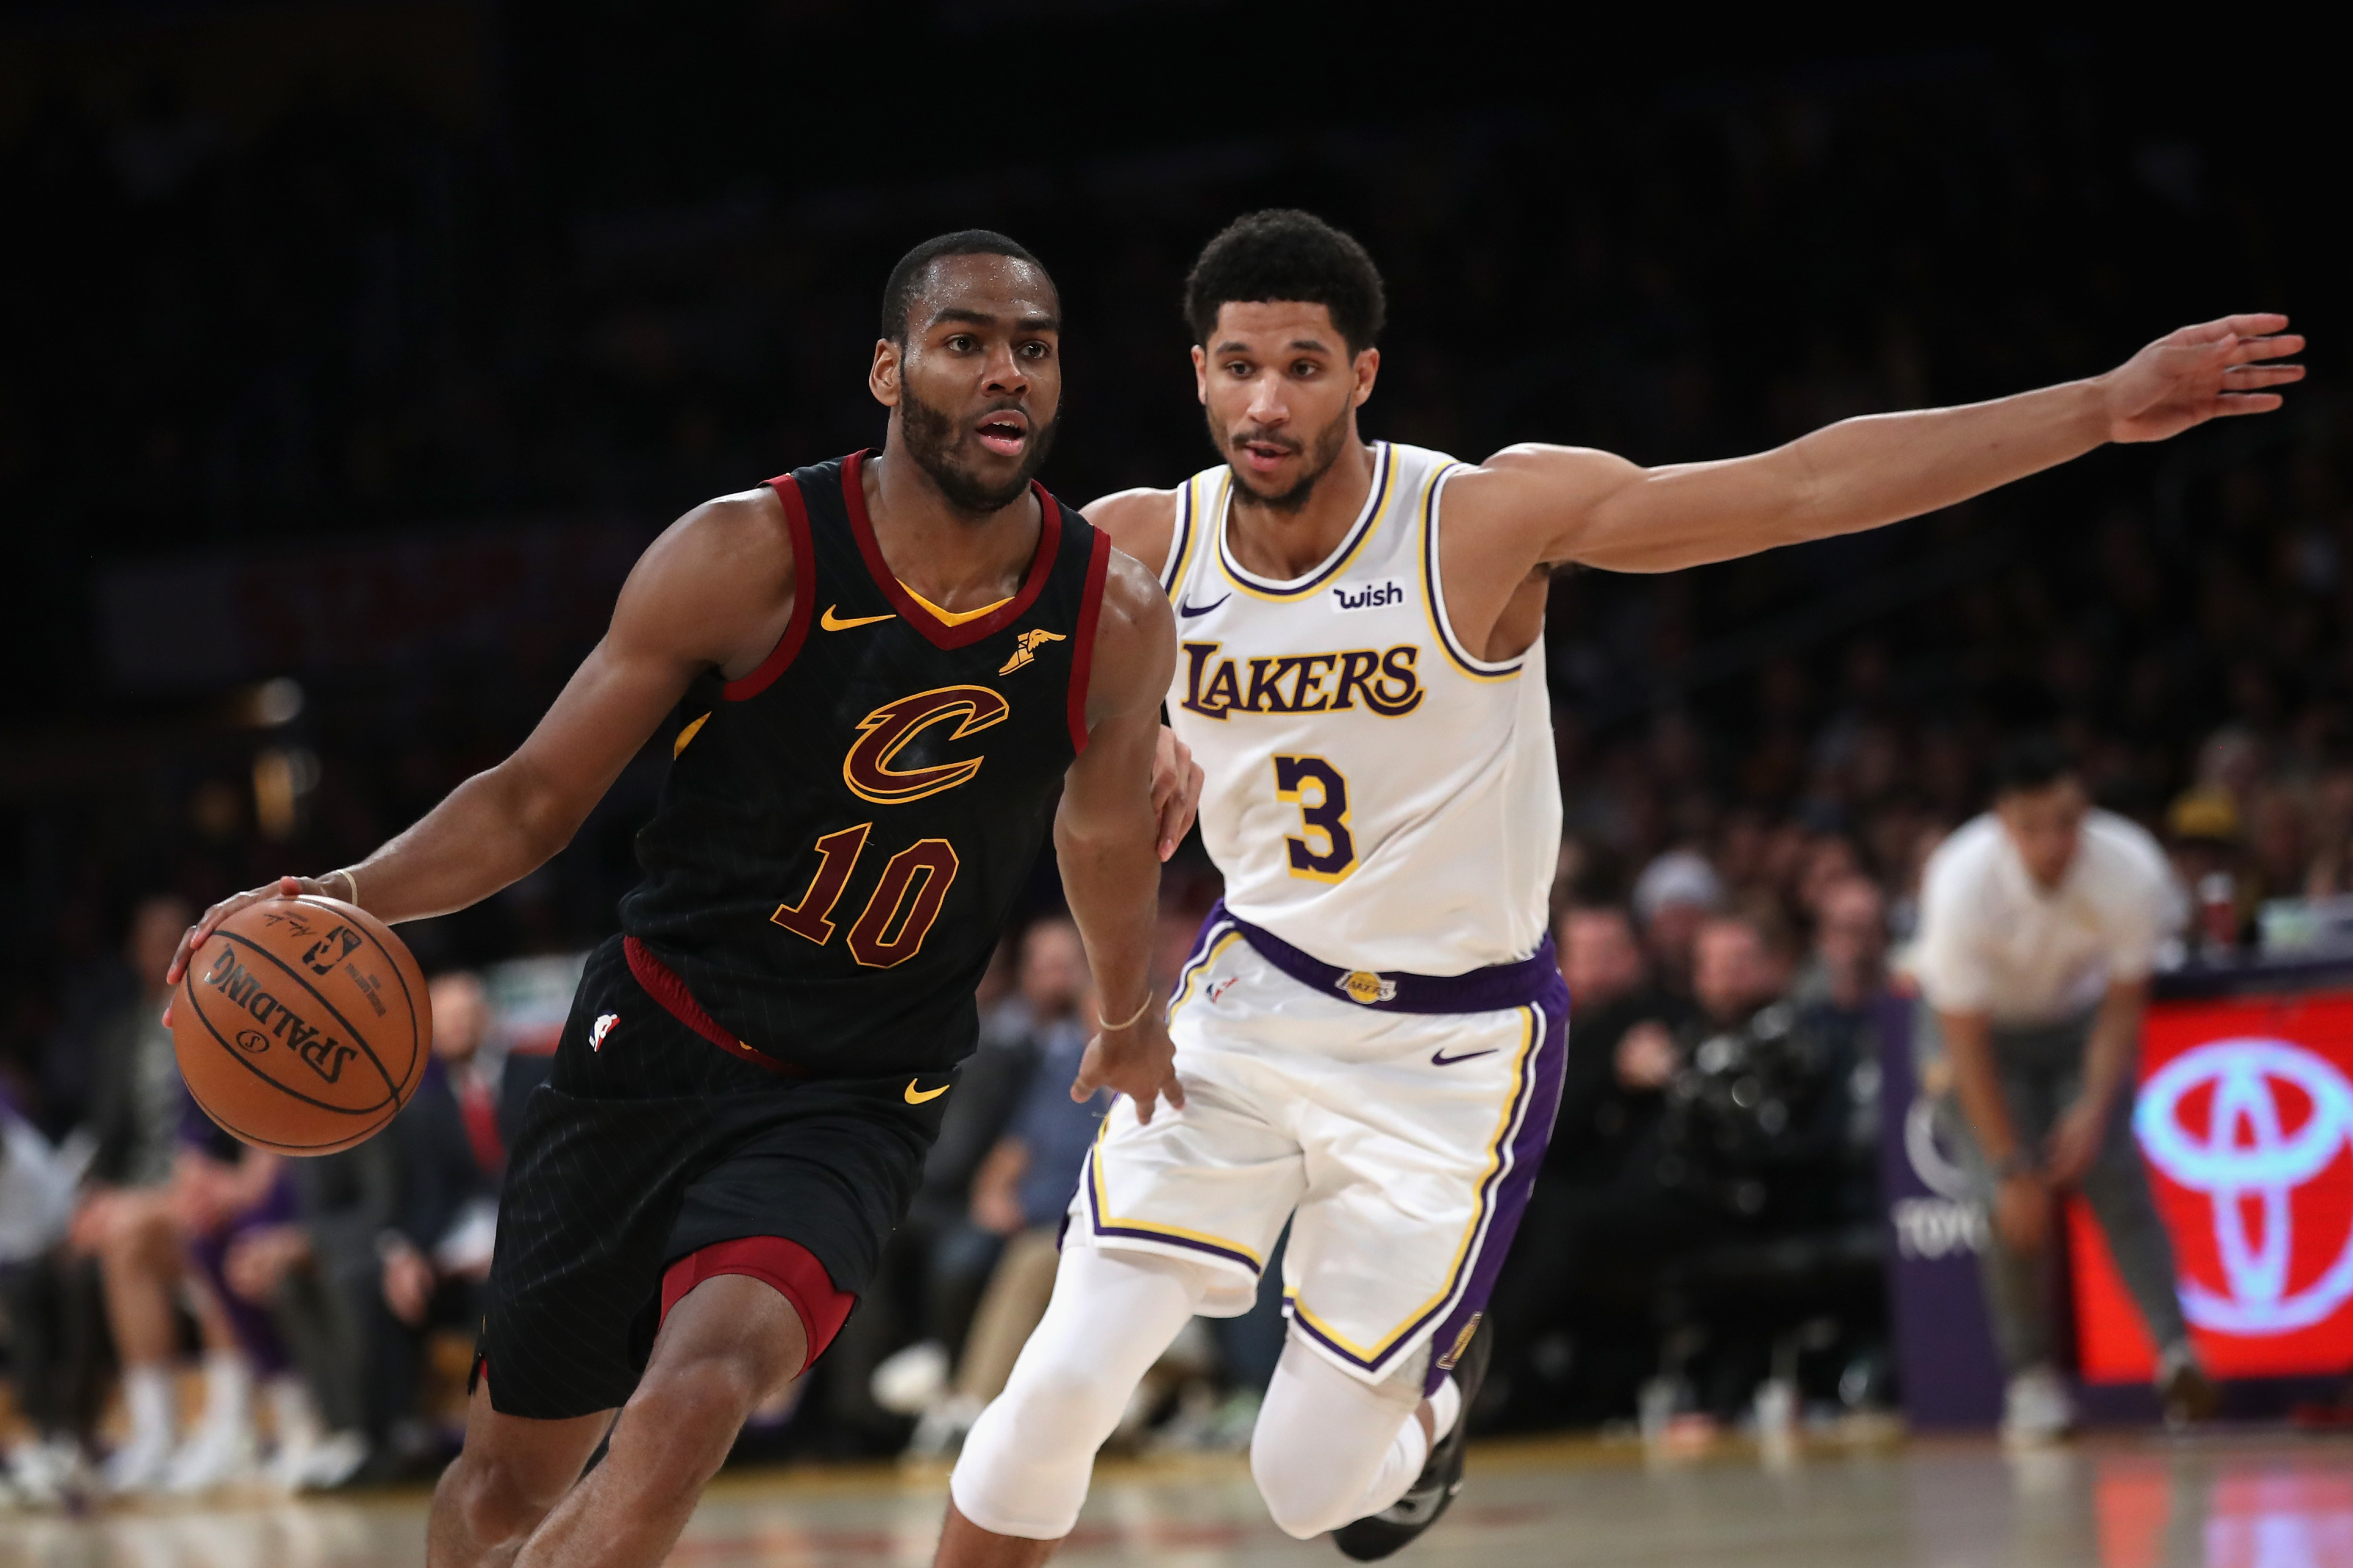 Laker guard reportedly available; unlikely option for Golden State Warriors